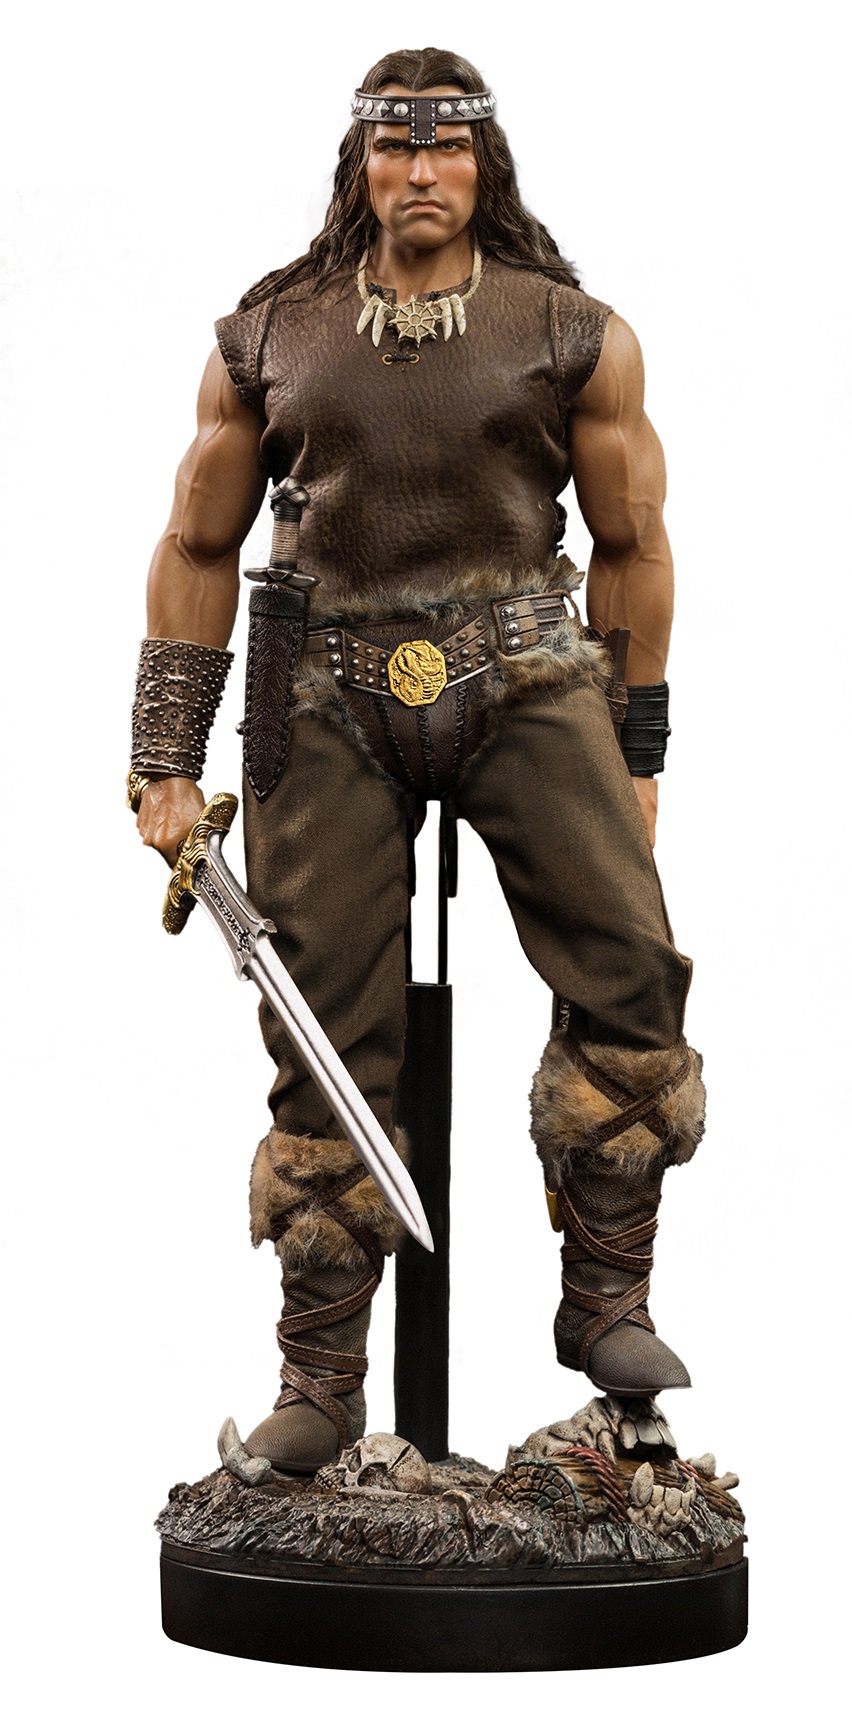 Fantasy - NEW PRODUCT: Haoyutoys: HH18064 1/6 Scale The Barbarian 18003410